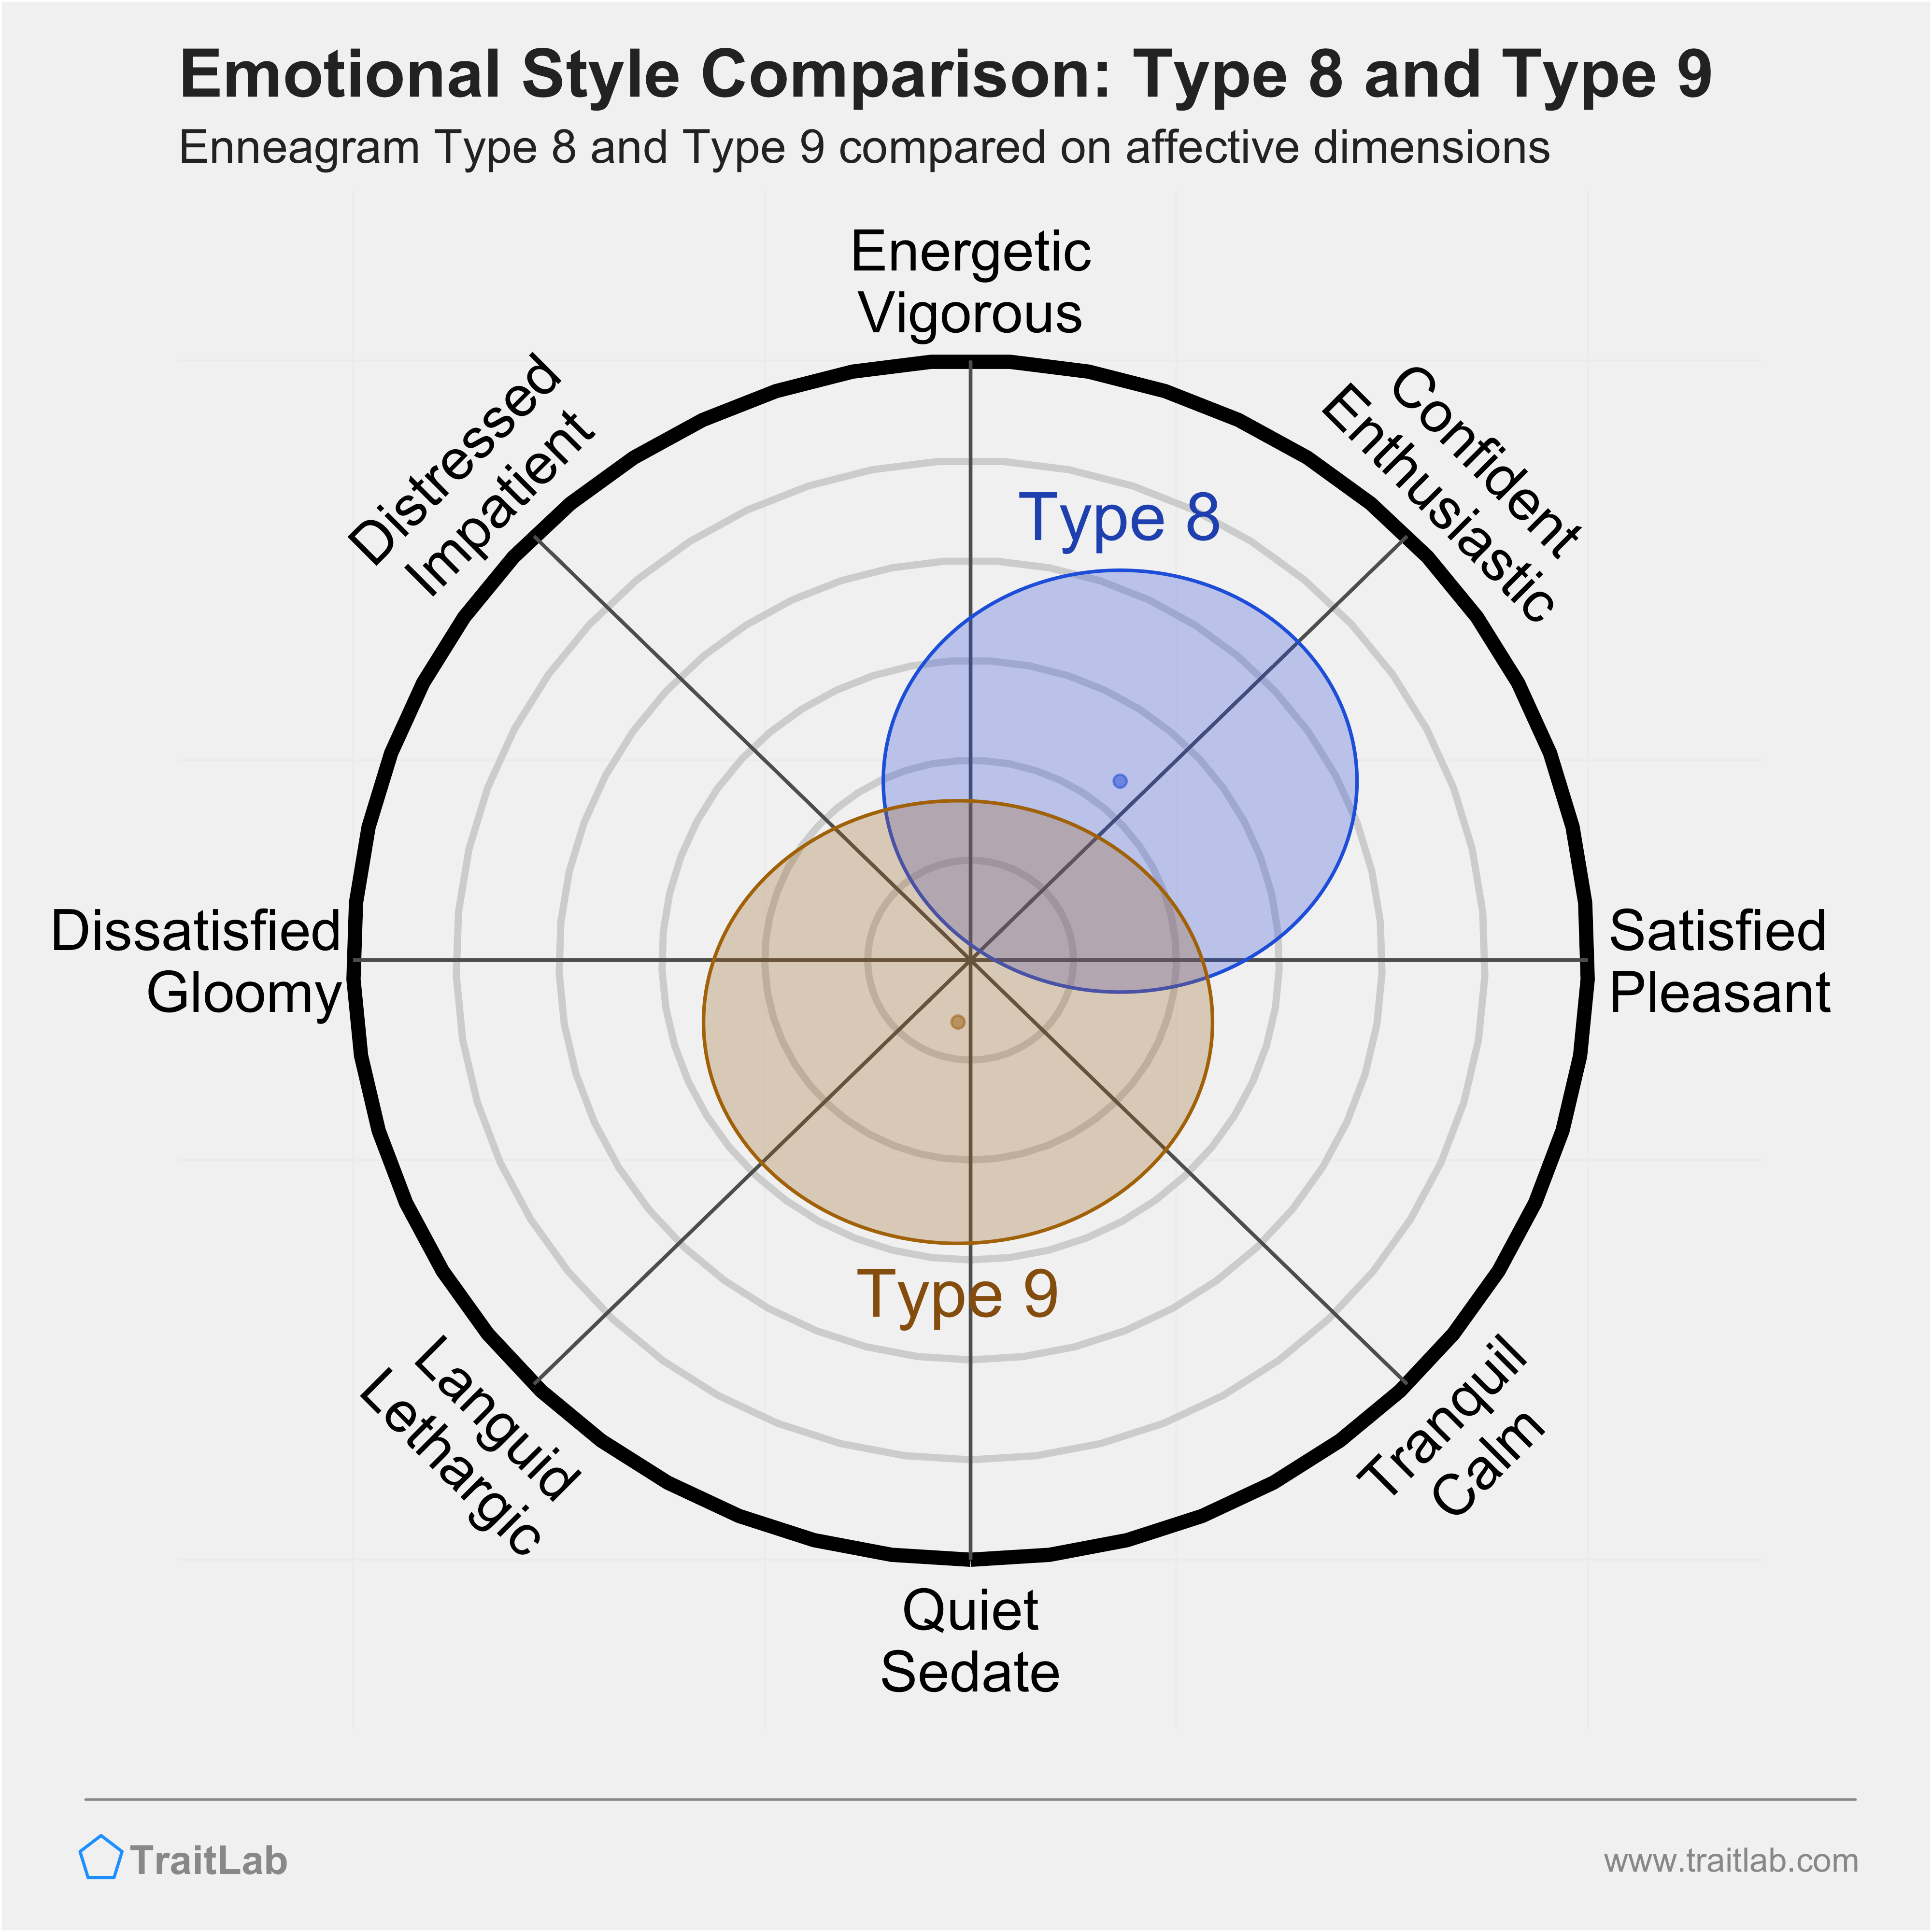 Type 8 and Type 9 comparison across emotional (affective) dimensions